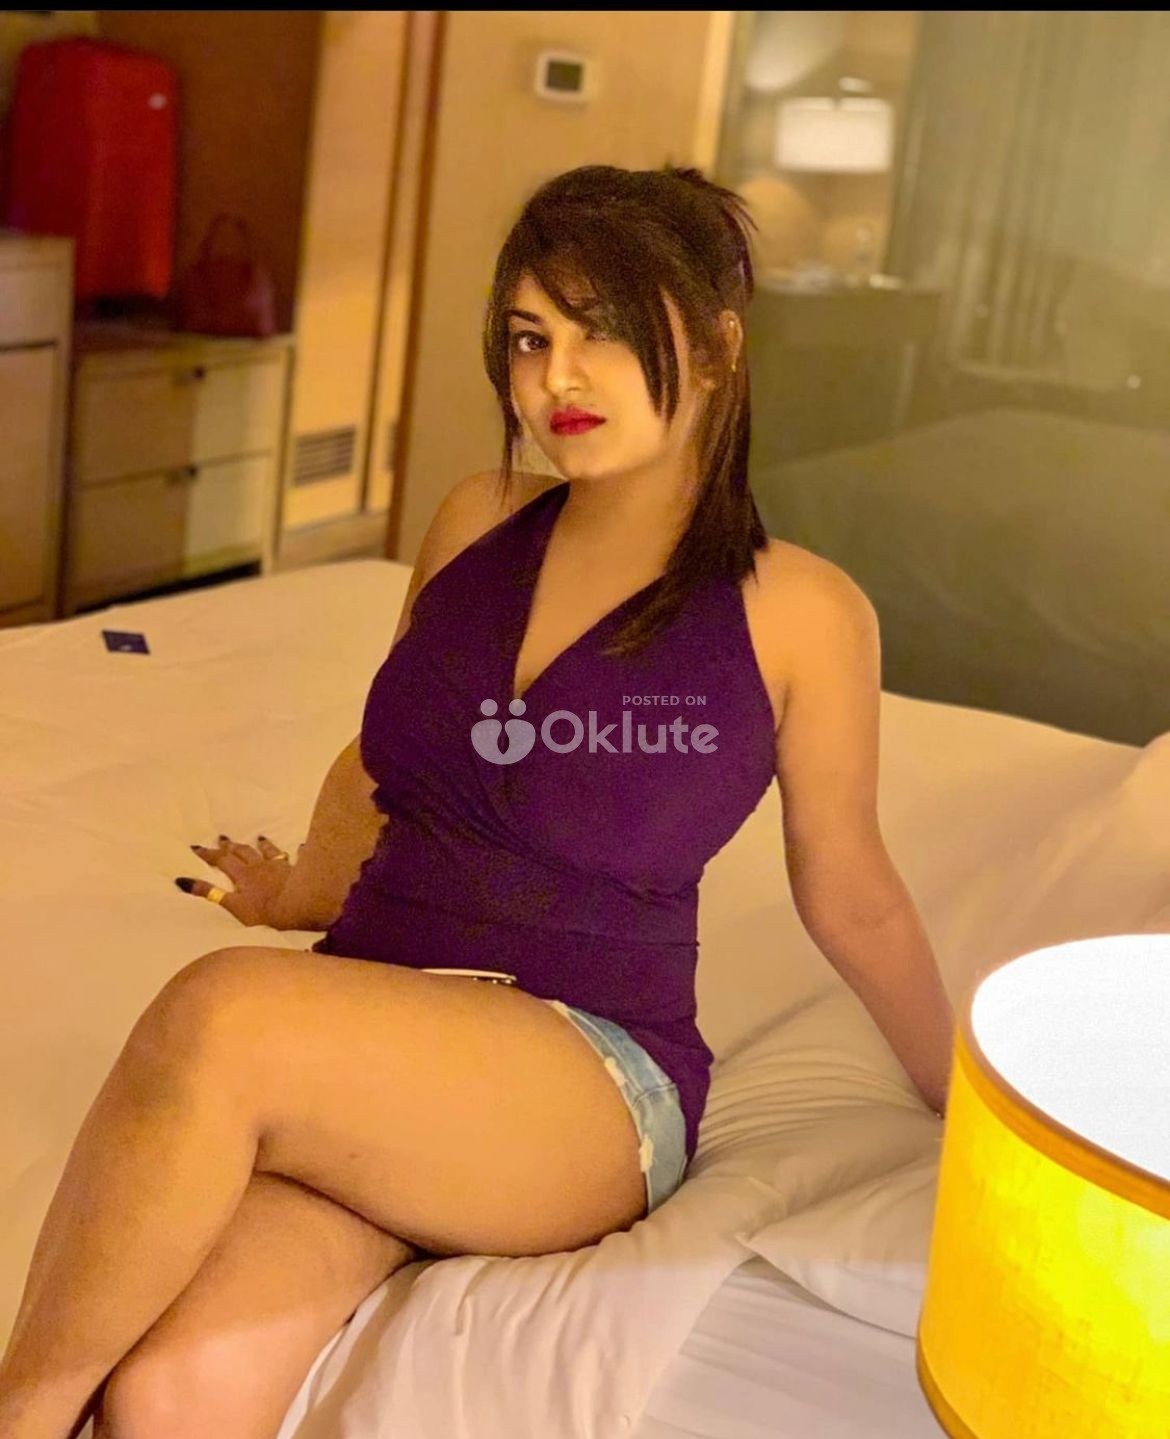 Hi I am genuine callage girl provide live nude video call service 24 hours available demo charge 99 full nude open